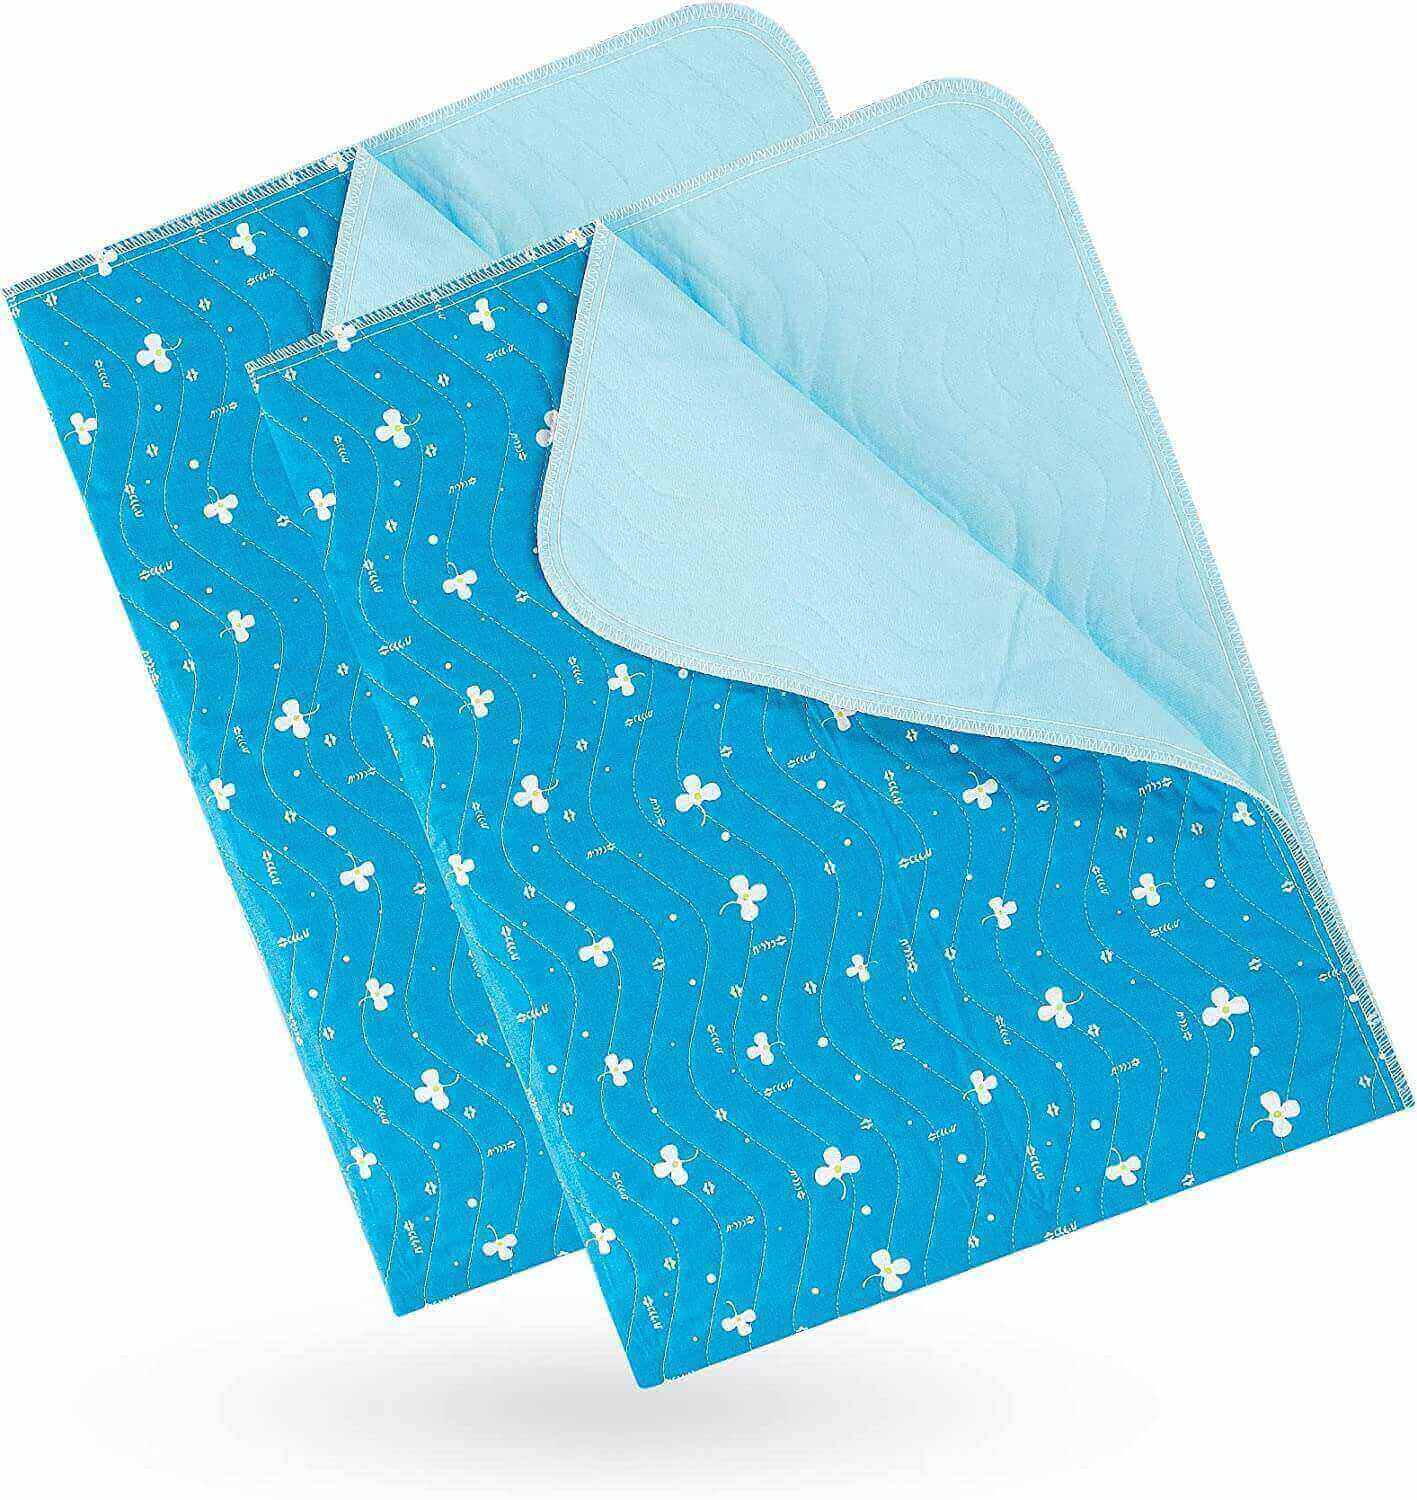 Fanwer incontinence bed pads, feature image